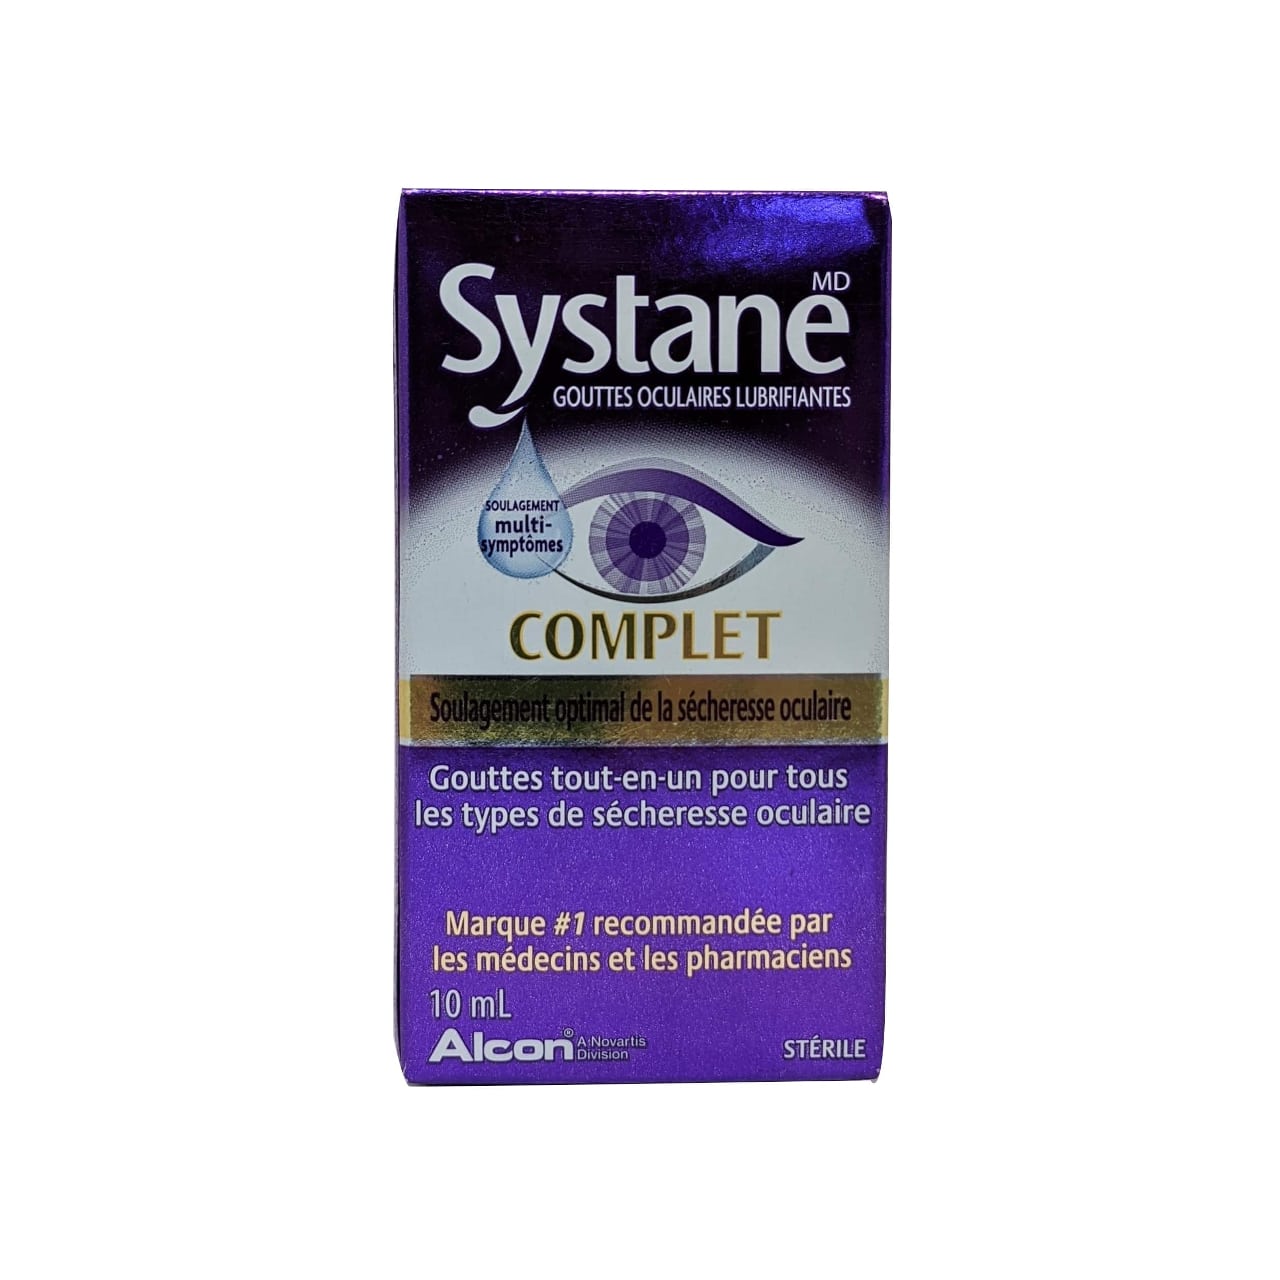 French product label for Alcon Systane Complete Lubricant Eye Drops